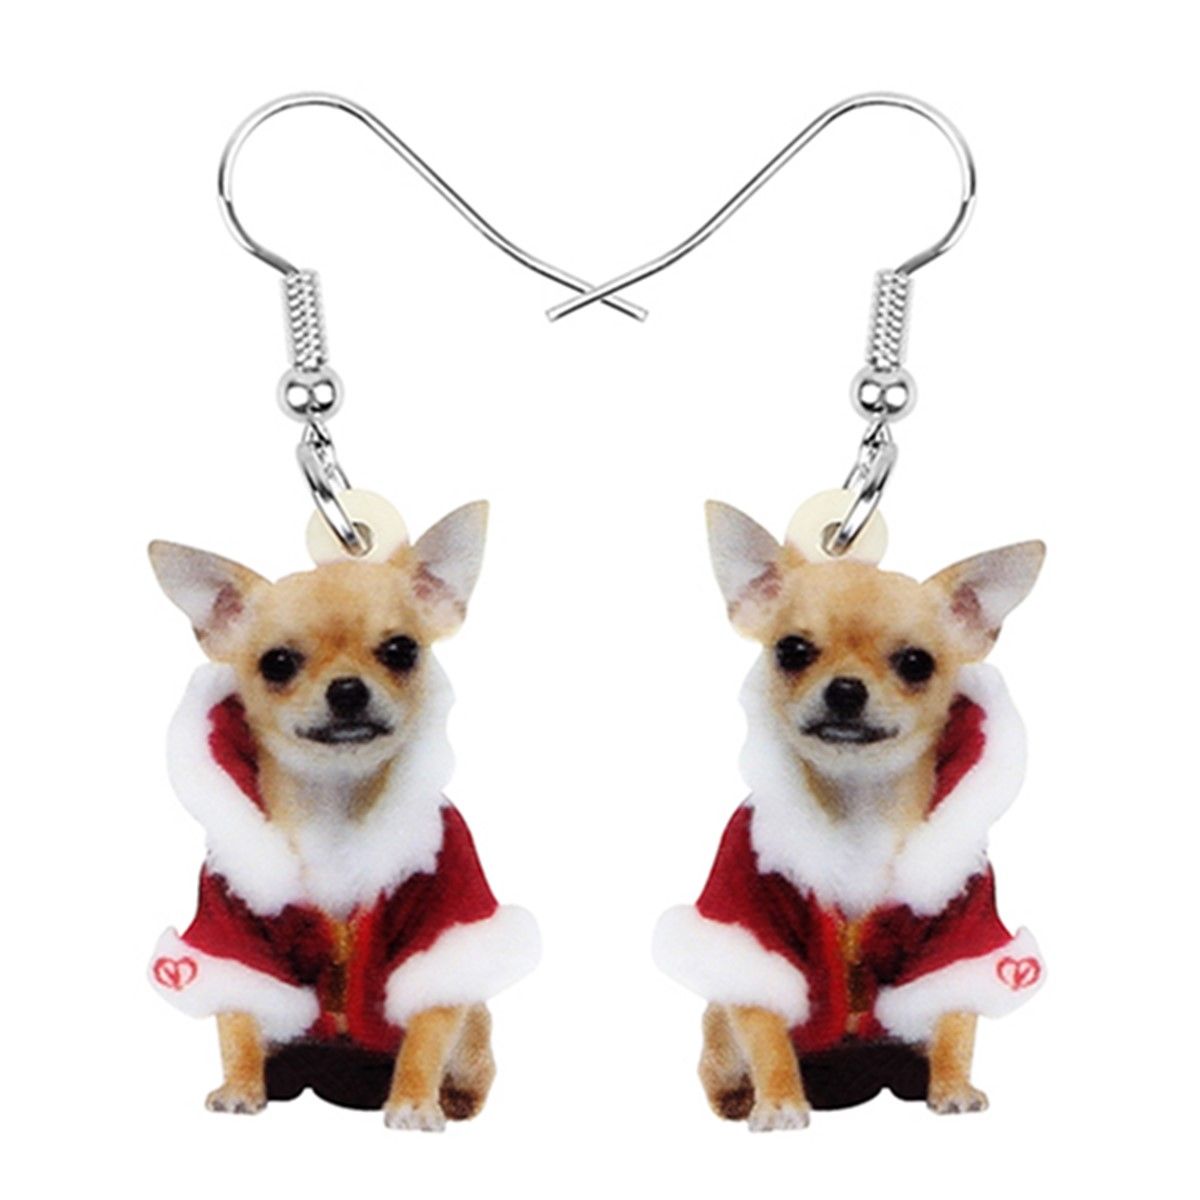 2020 Acrylic Christmas Sweet Chihuahua Dog Earrings Drop Dangle Animal Pets Jewelry For Women Girls Teens Party Gift Accessory From Beijia2013 2 11 Dhgate Com